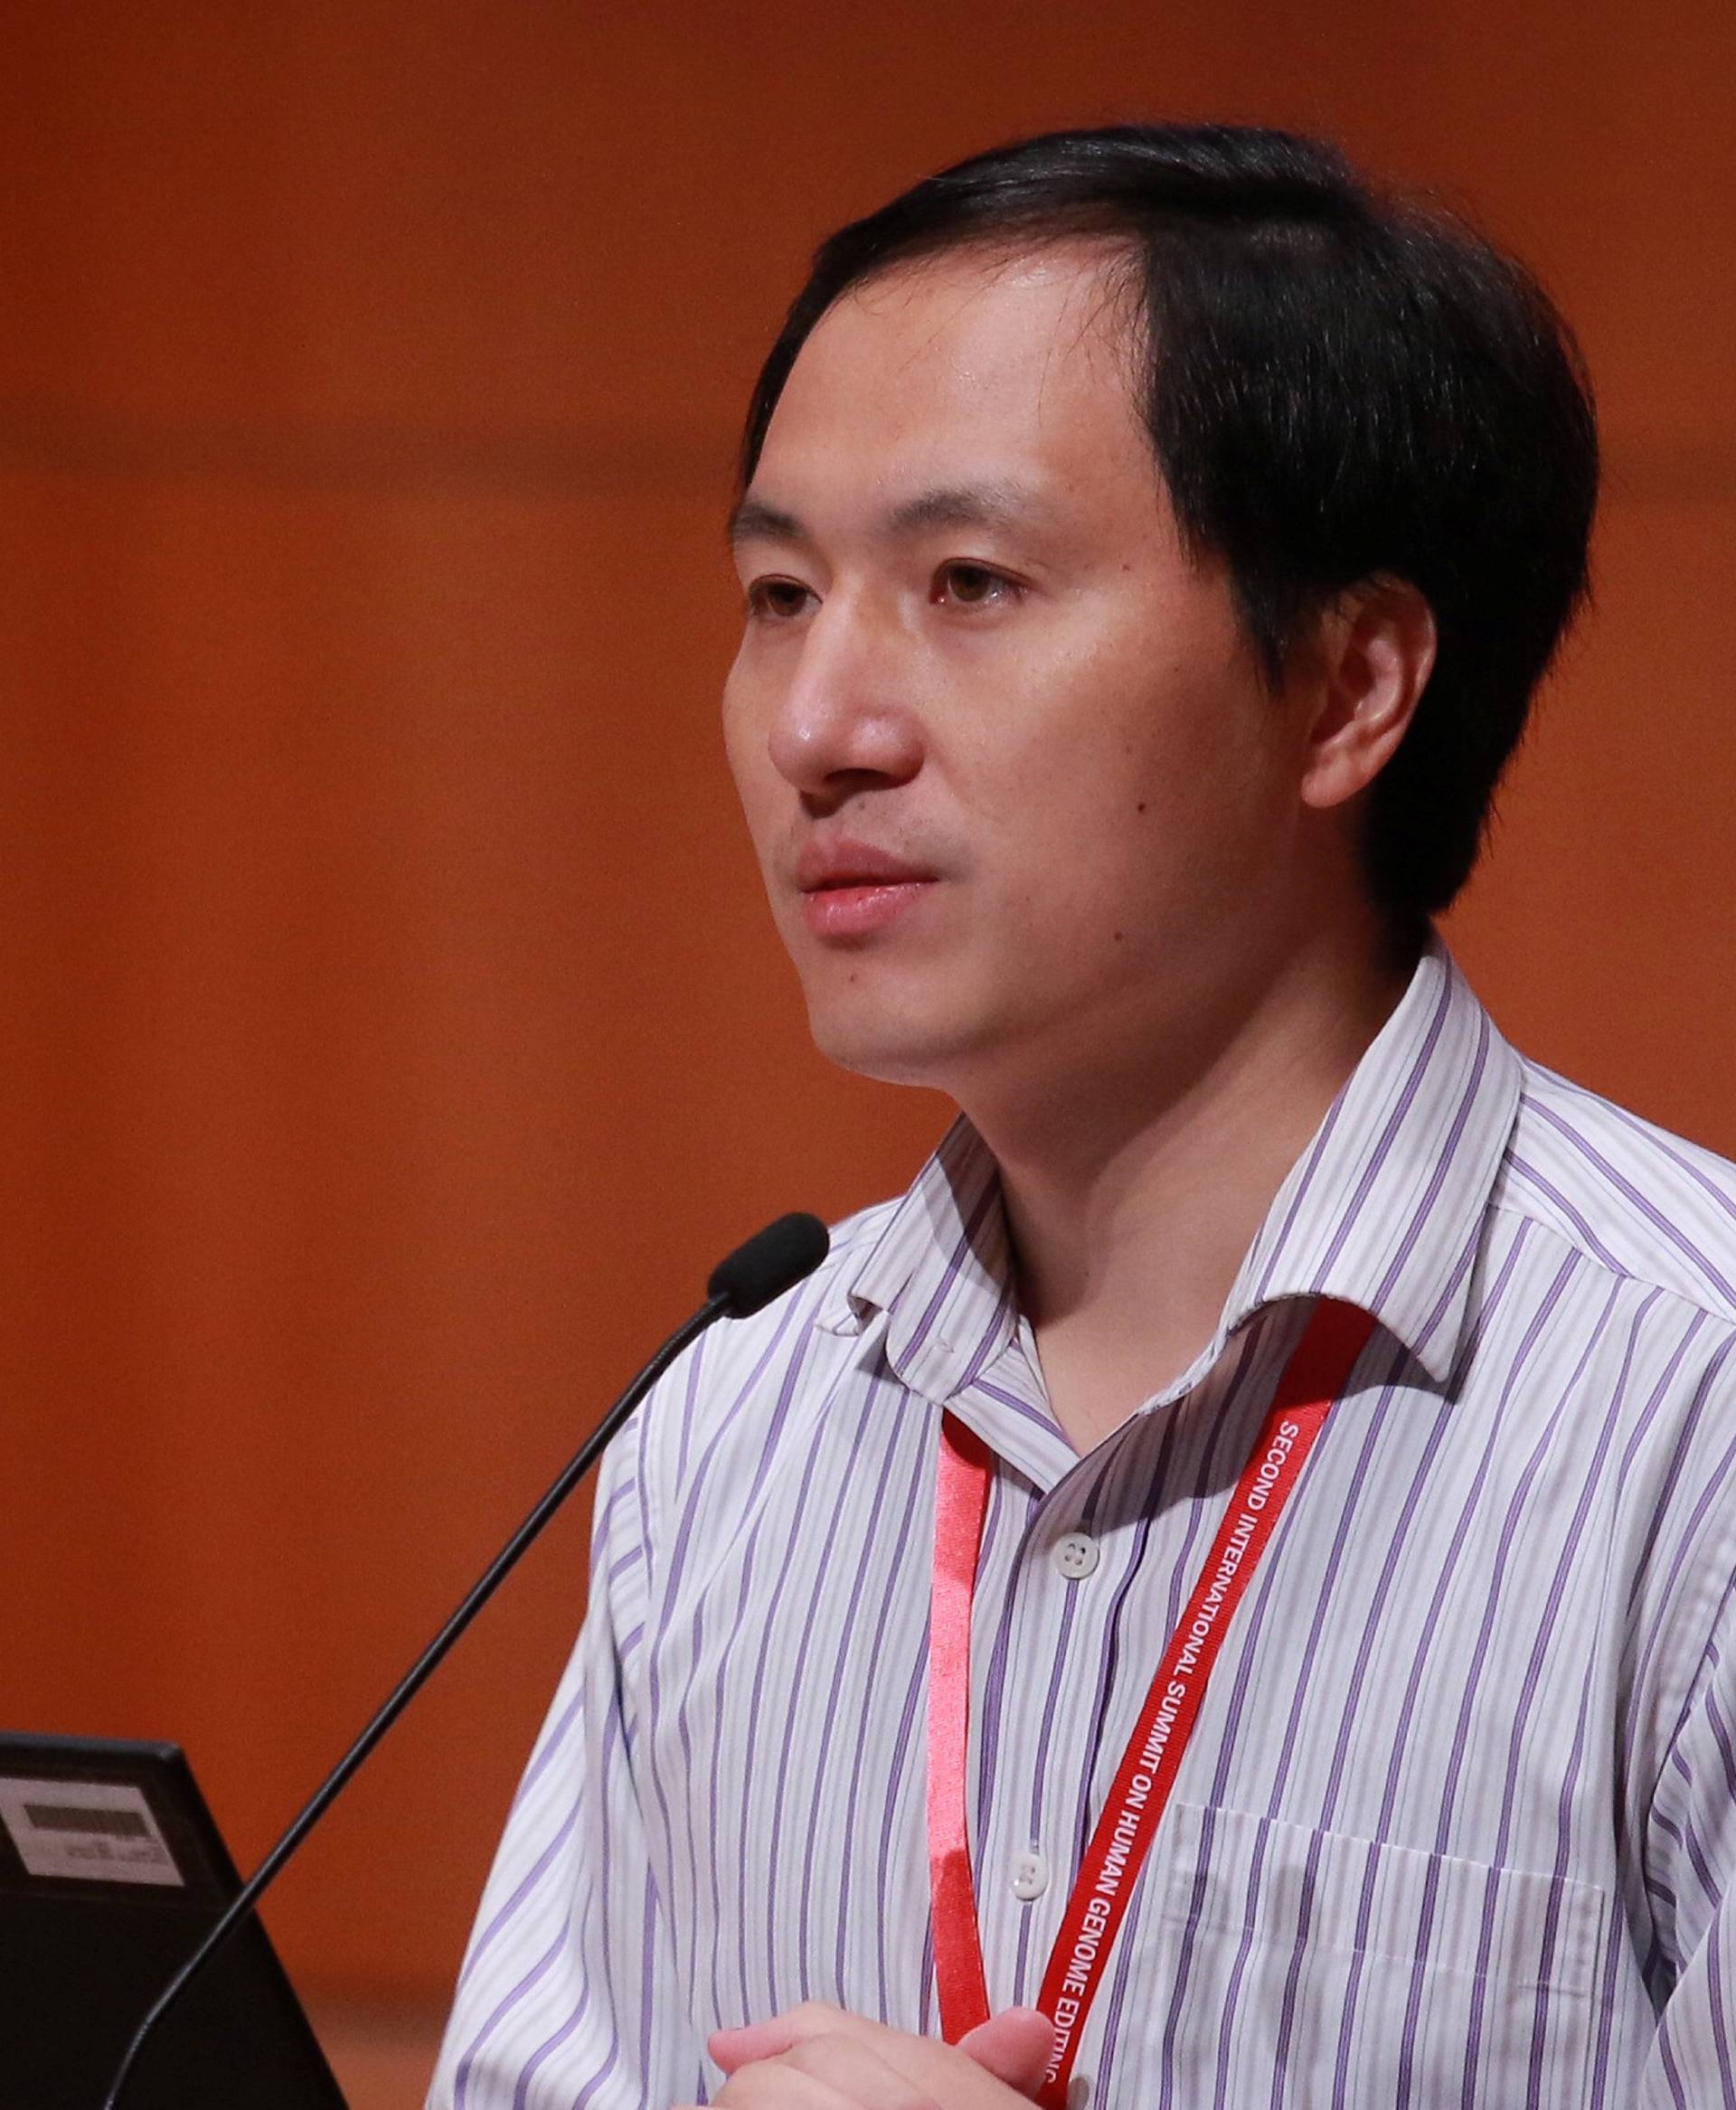 Scientist He Jiankui attends the International Summit on Human Genome Editing at the University of Hong Kong